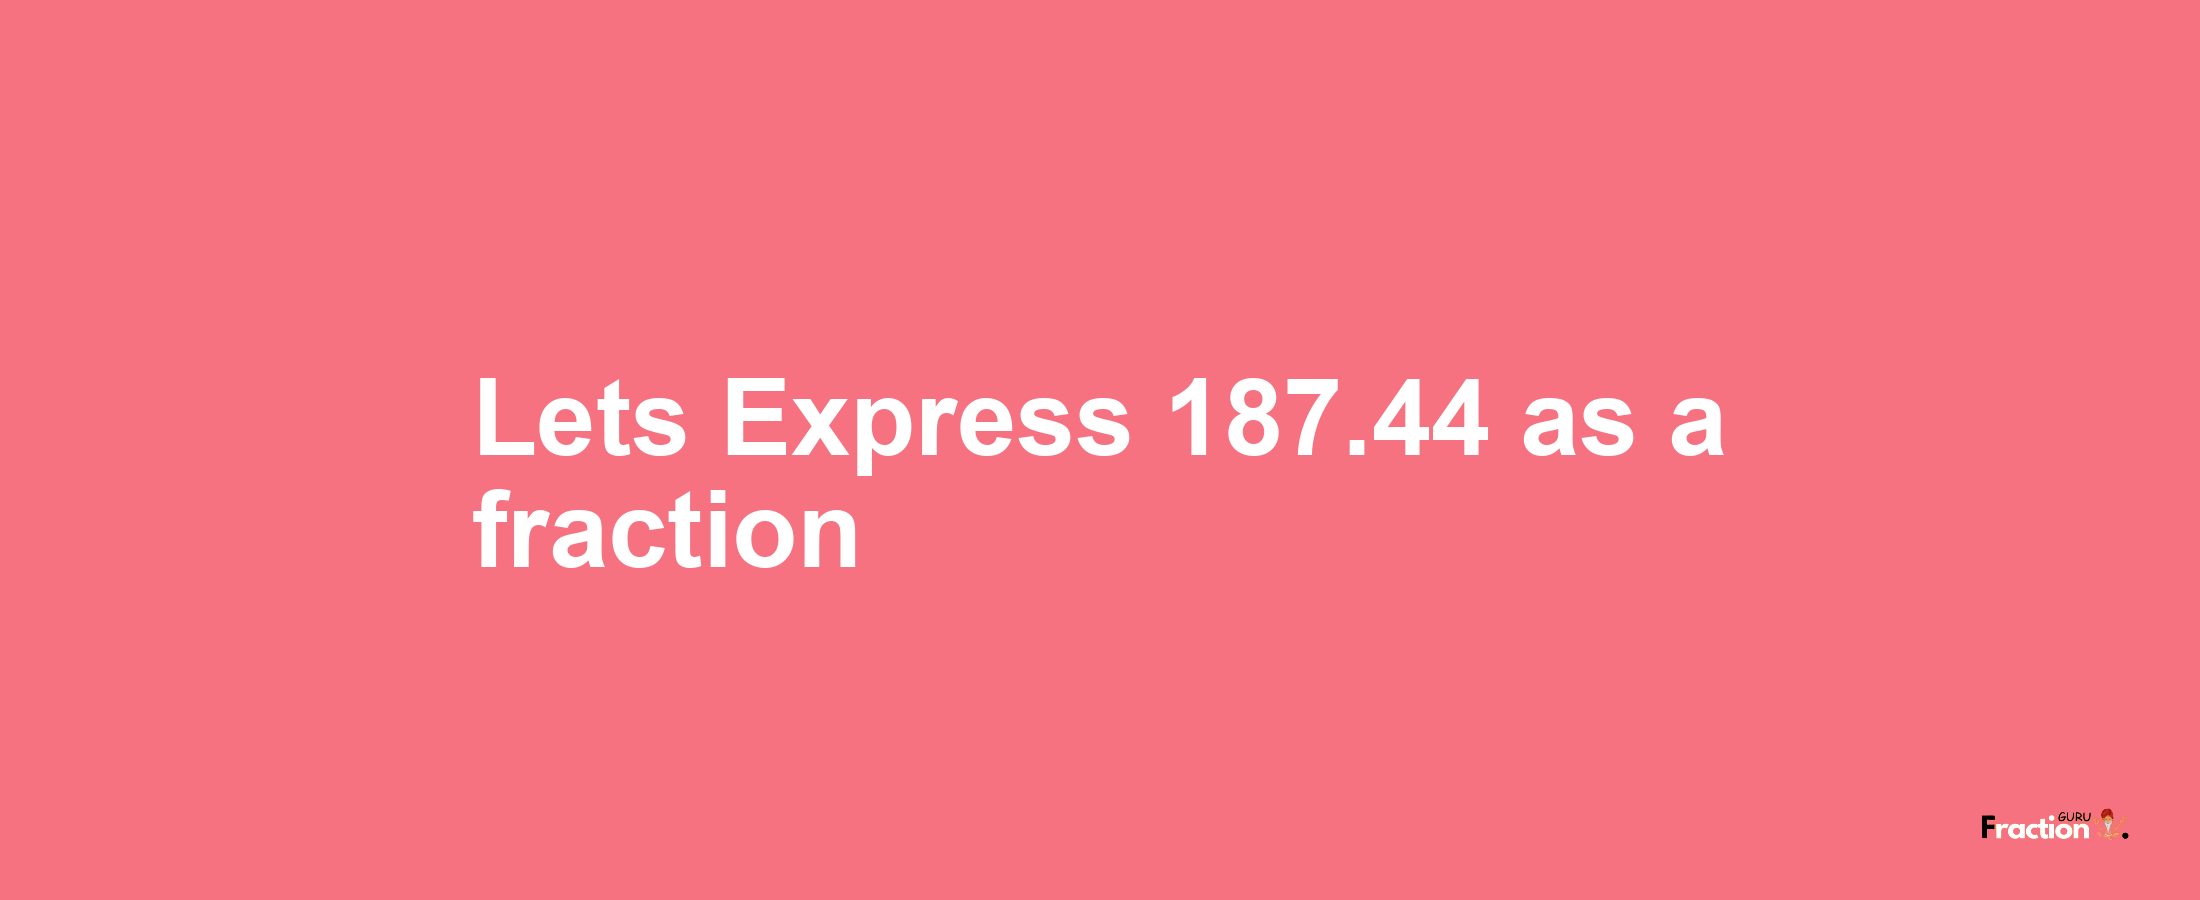 Lets Express 187.44 as afraction